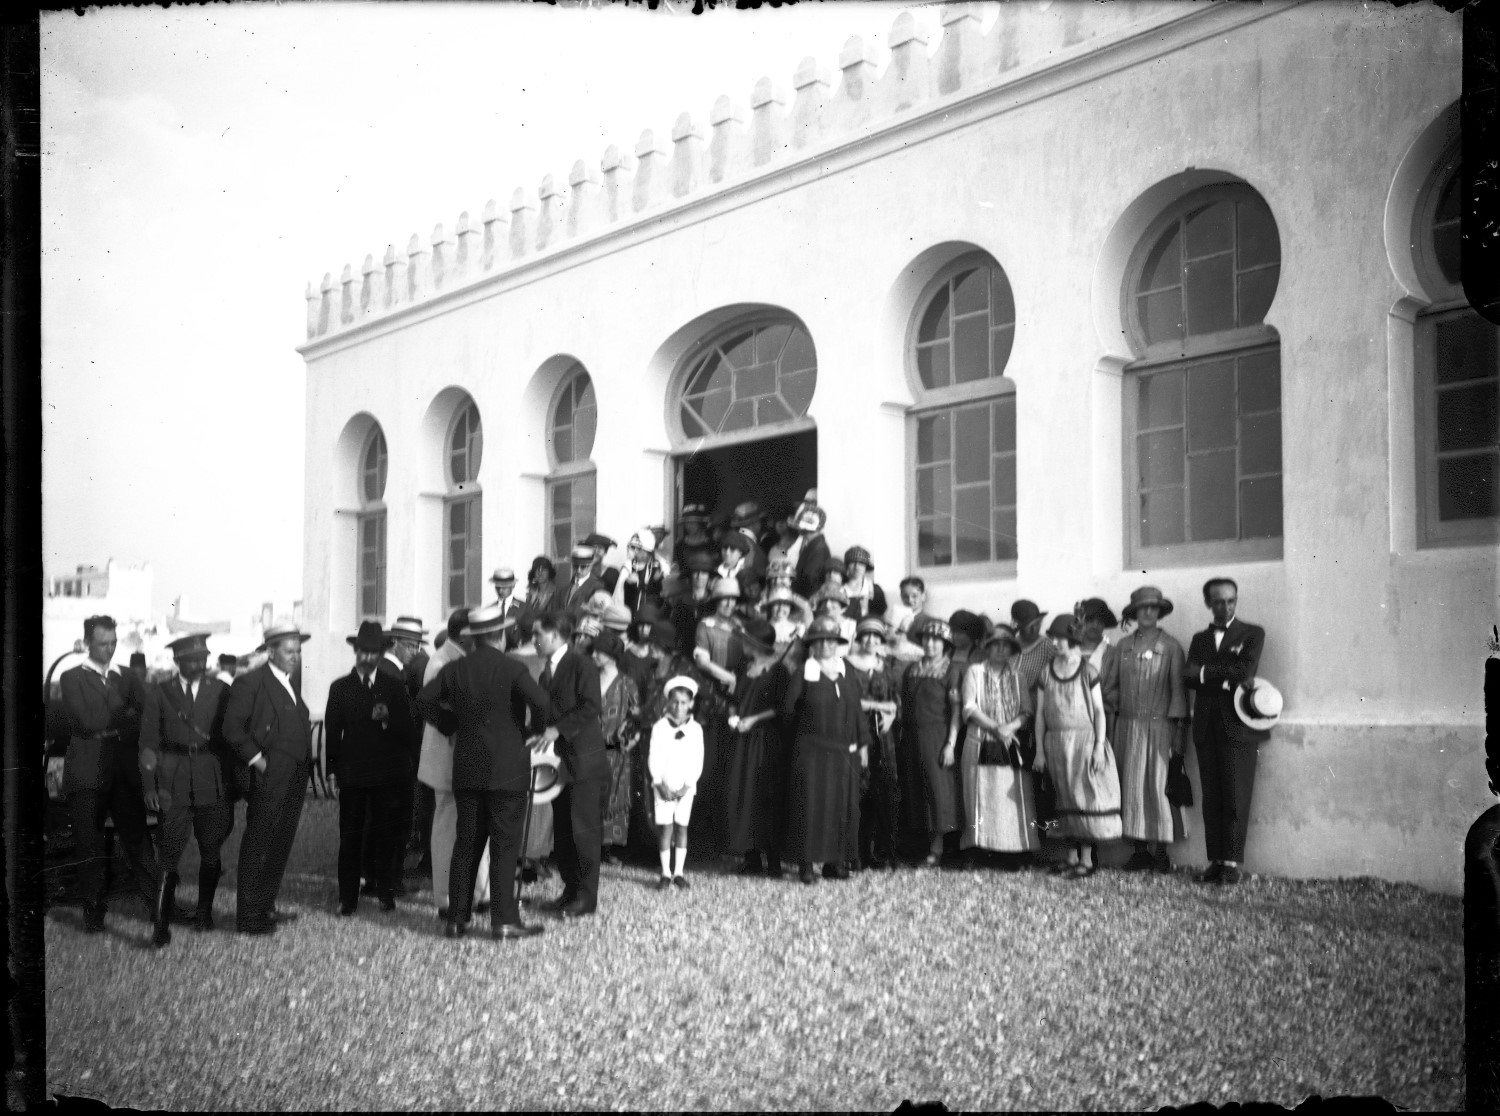 Large group of people, in European dress, standing outside a building